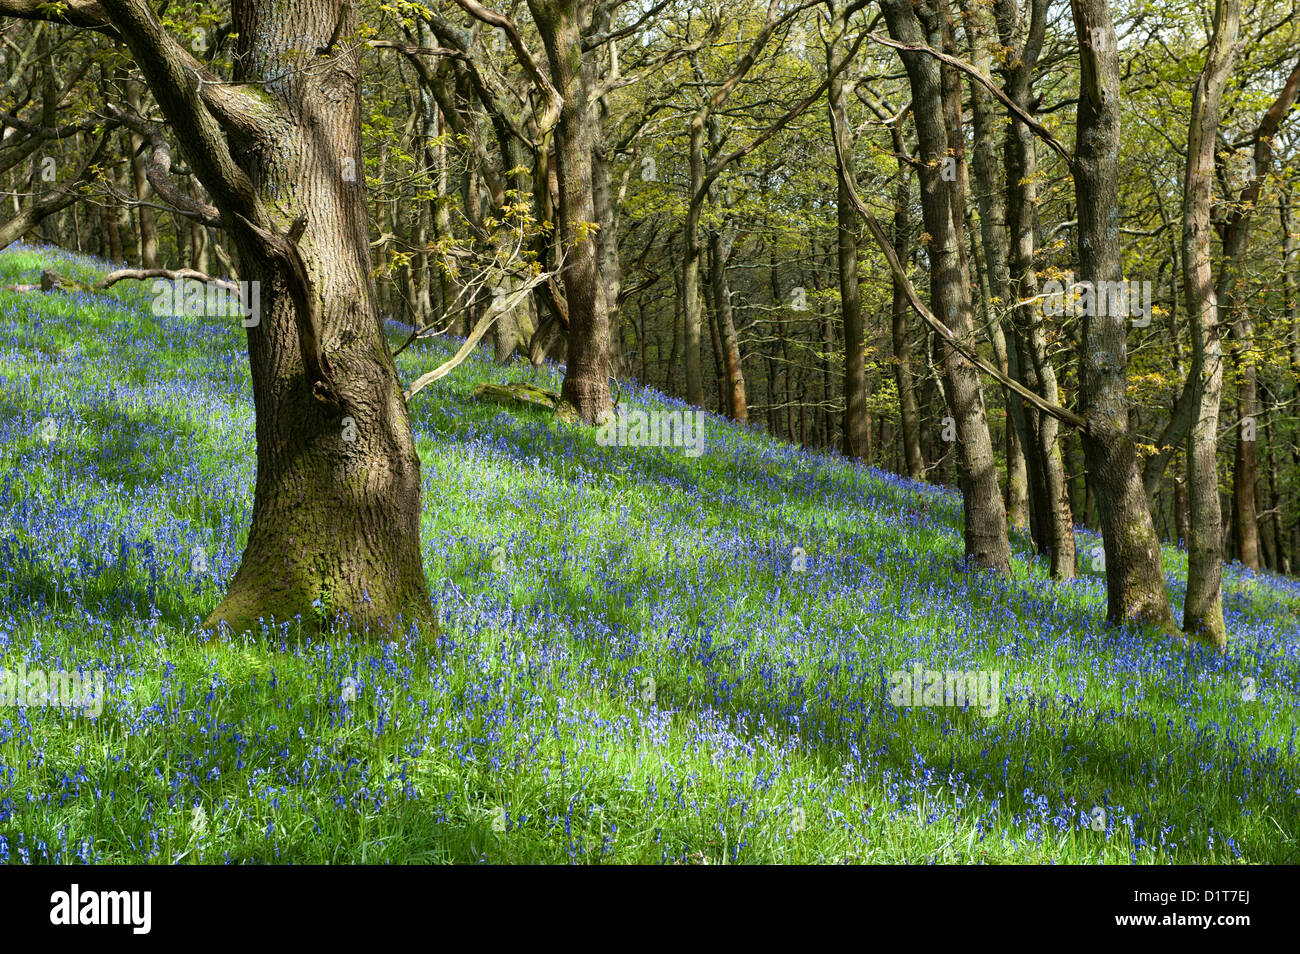 Carpet of Bluebells in ancient woodland, late spring. Hyacinthoides non-scripta Stock Photo